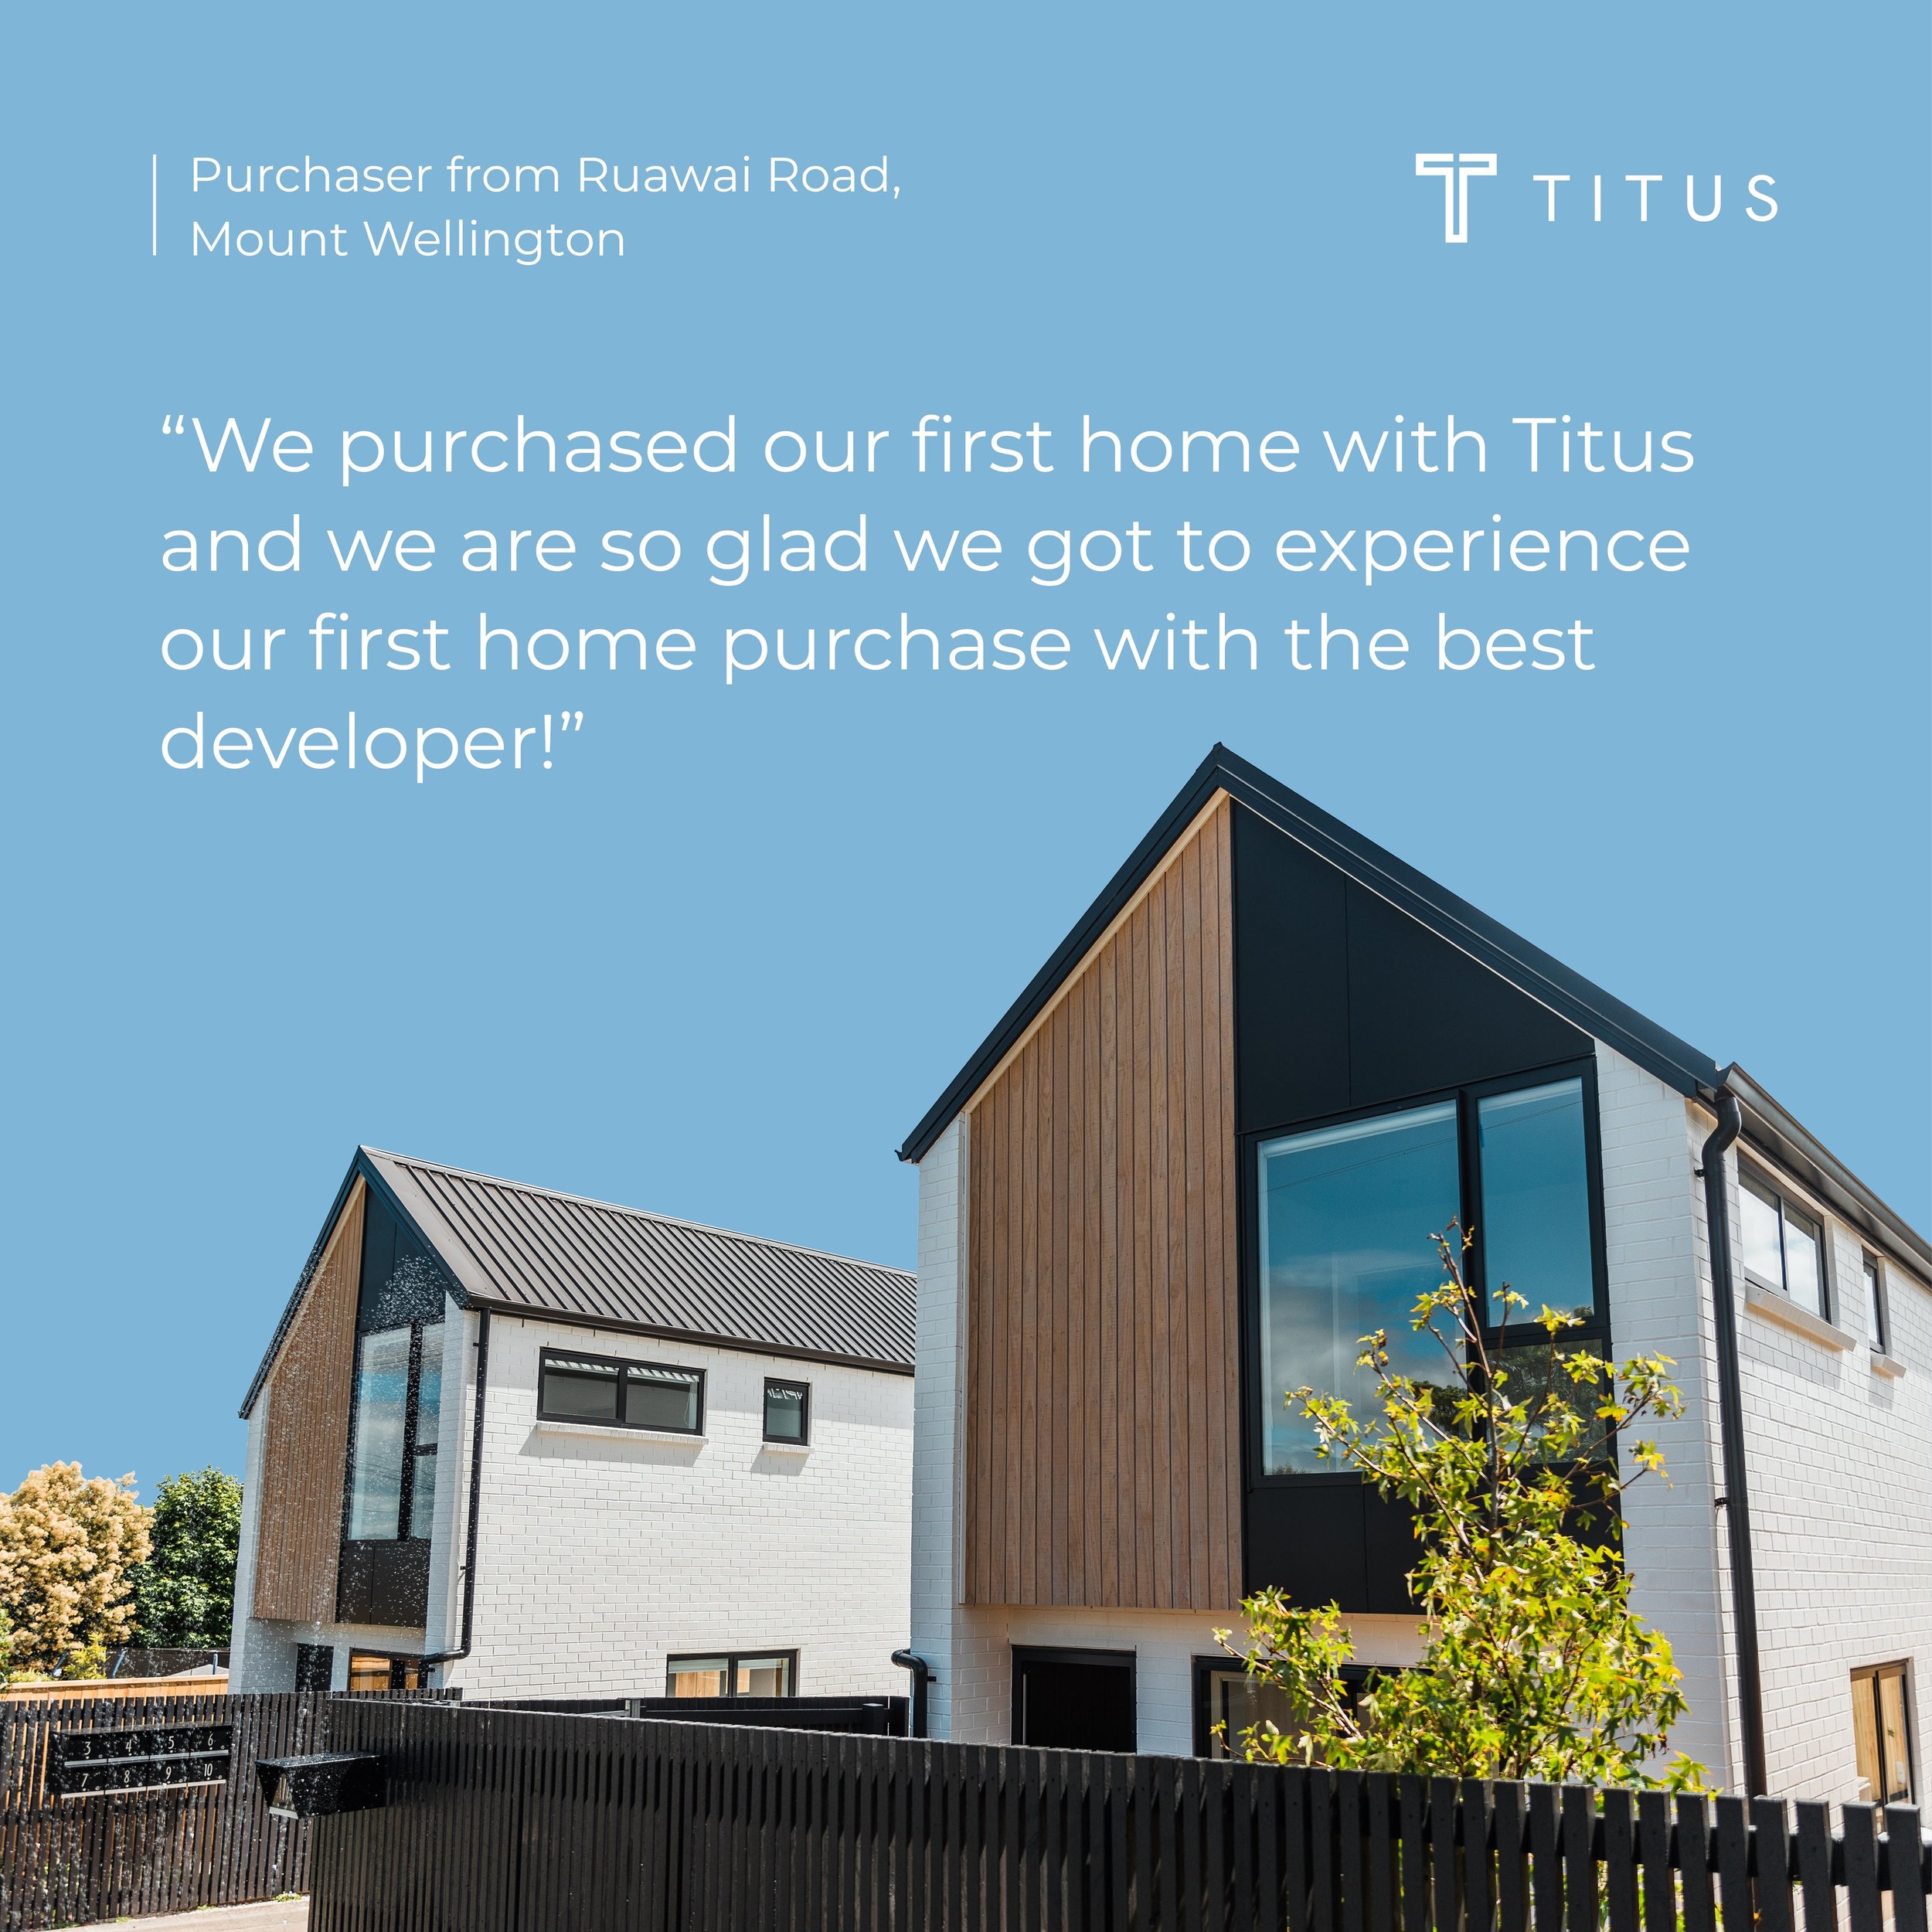 We aim to make your first home buying experience as seamless and stress-free as possible. Count on us to guide you from start to finish. 🏠